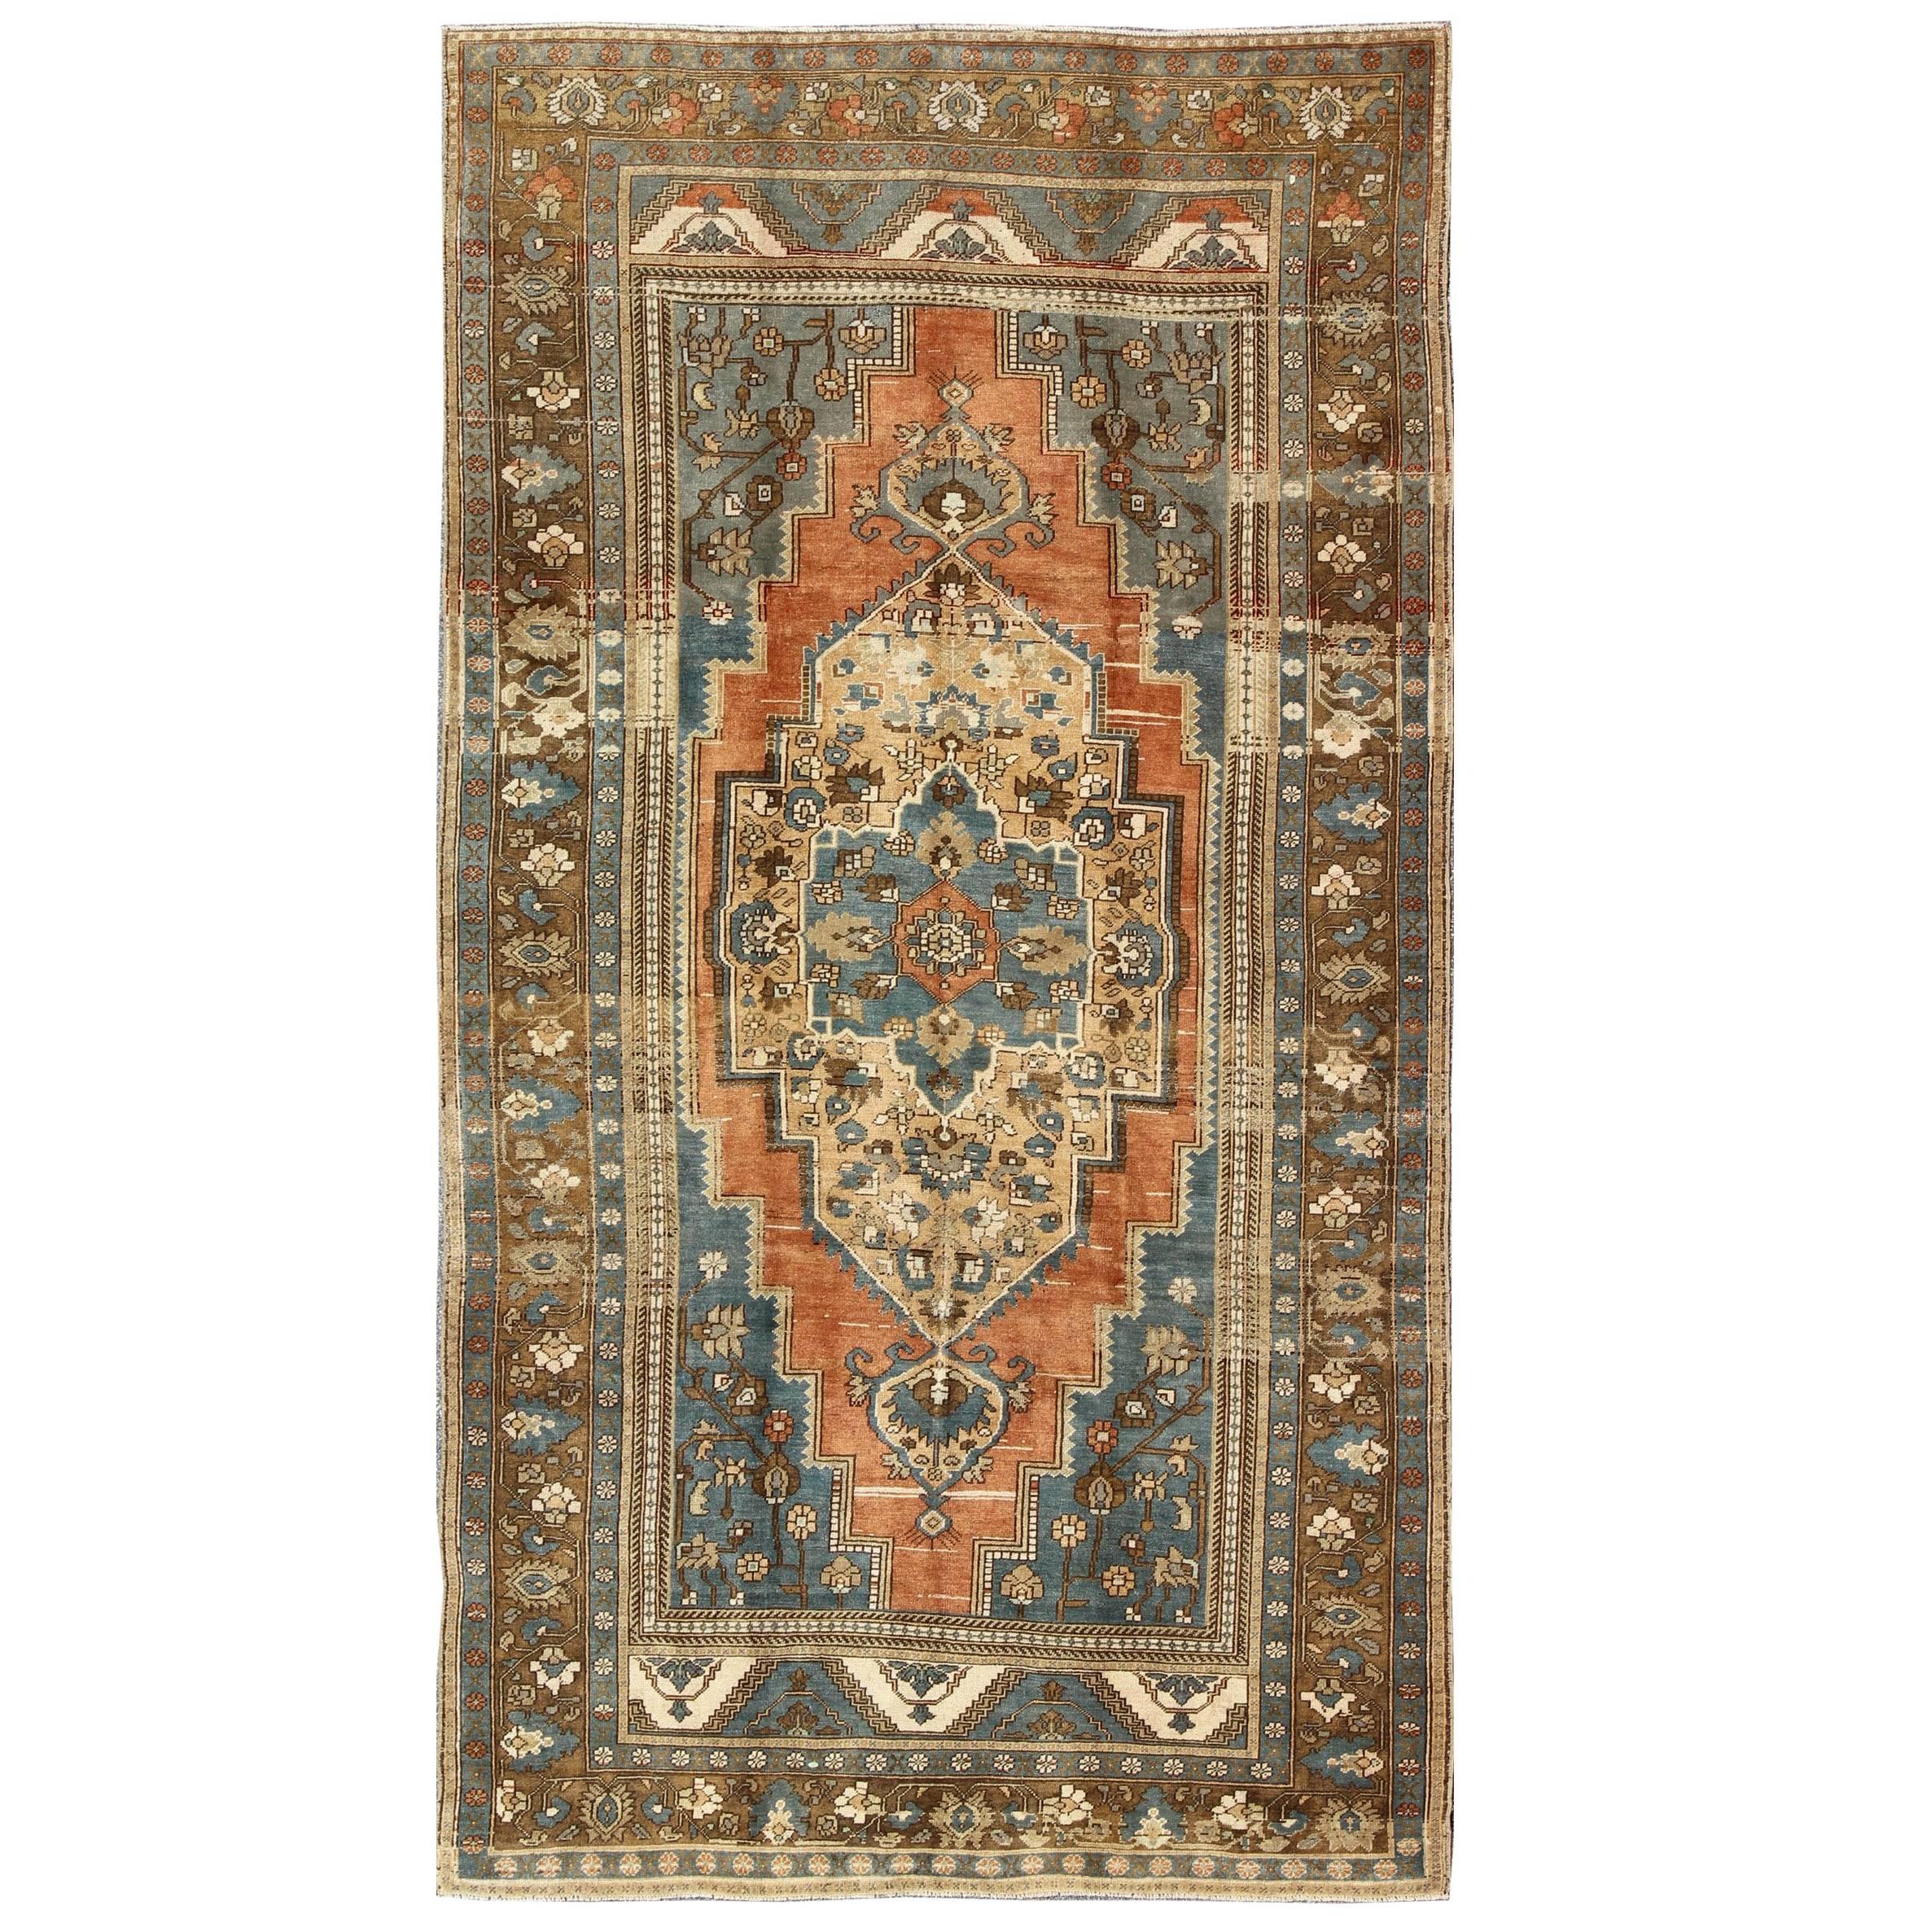 Antique Turkish Colorful Oushak Gallery Rug In Blue Brown & Terra-cotta